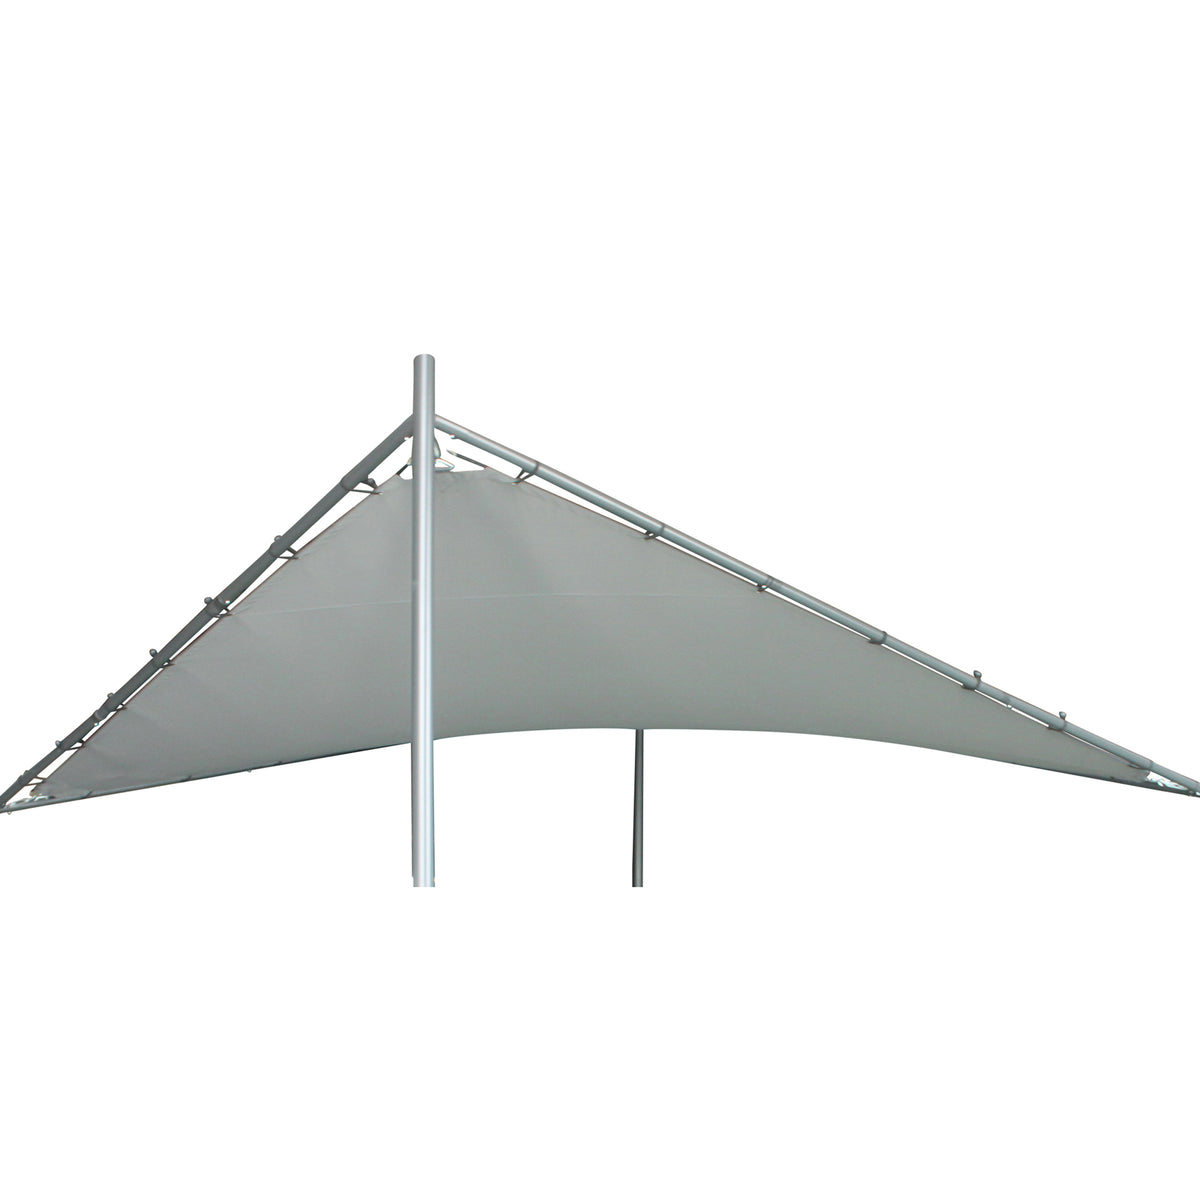 LG Outdoor Rodin 3.5m Sail Awning Replacement canopy- Grey